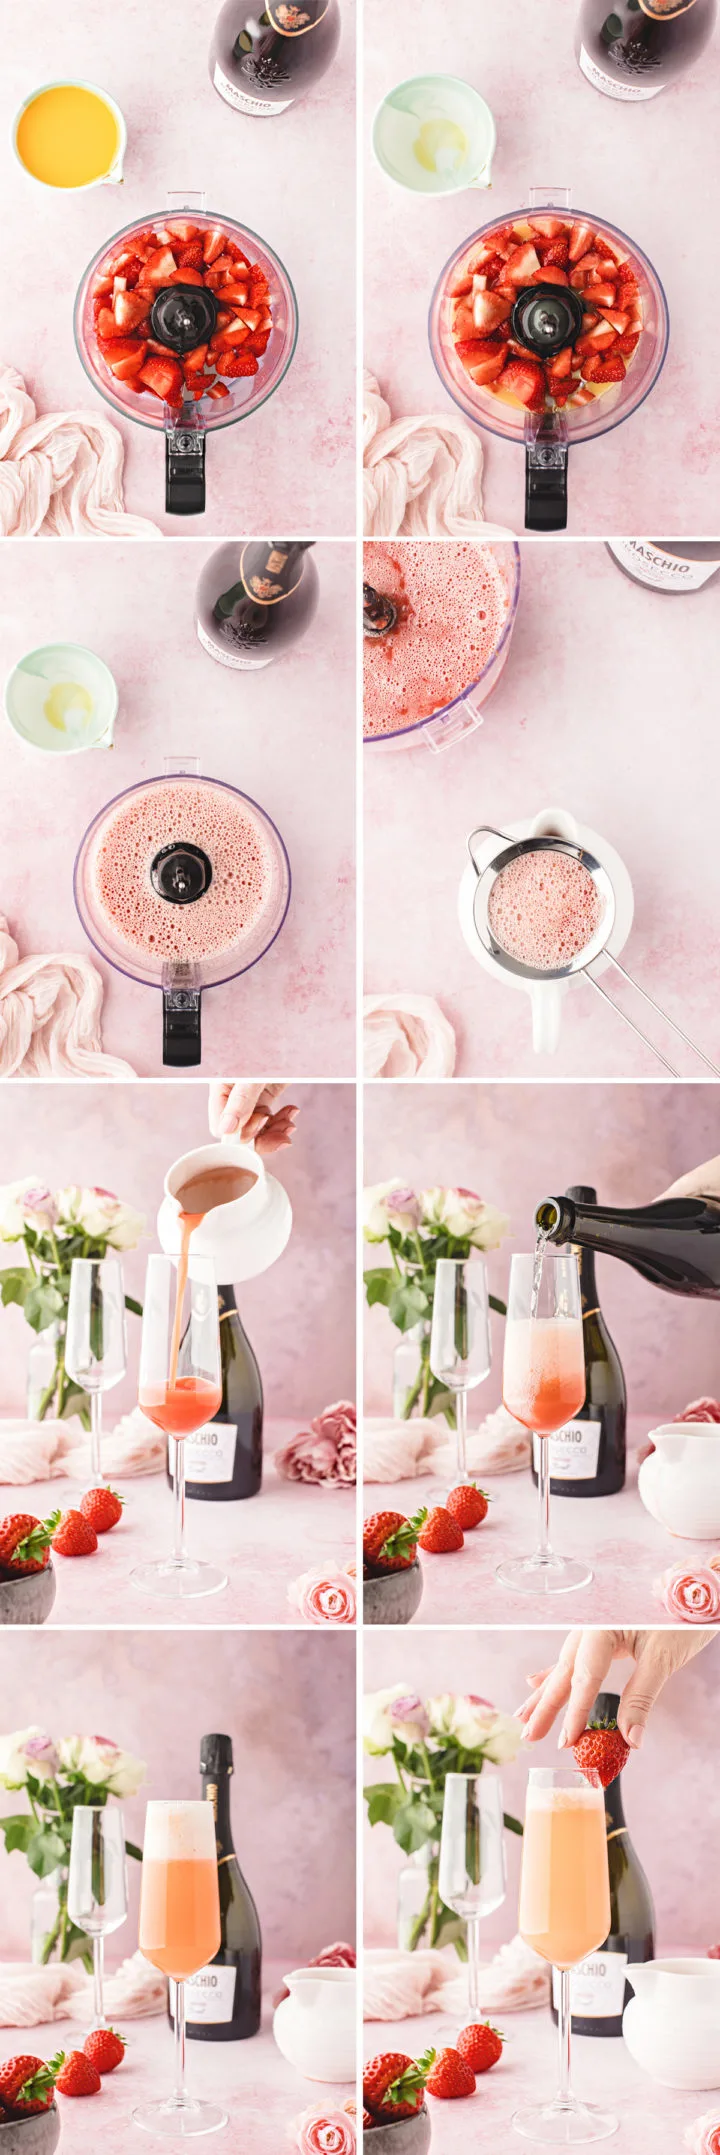 step by step photos to make a strawberry mimosa